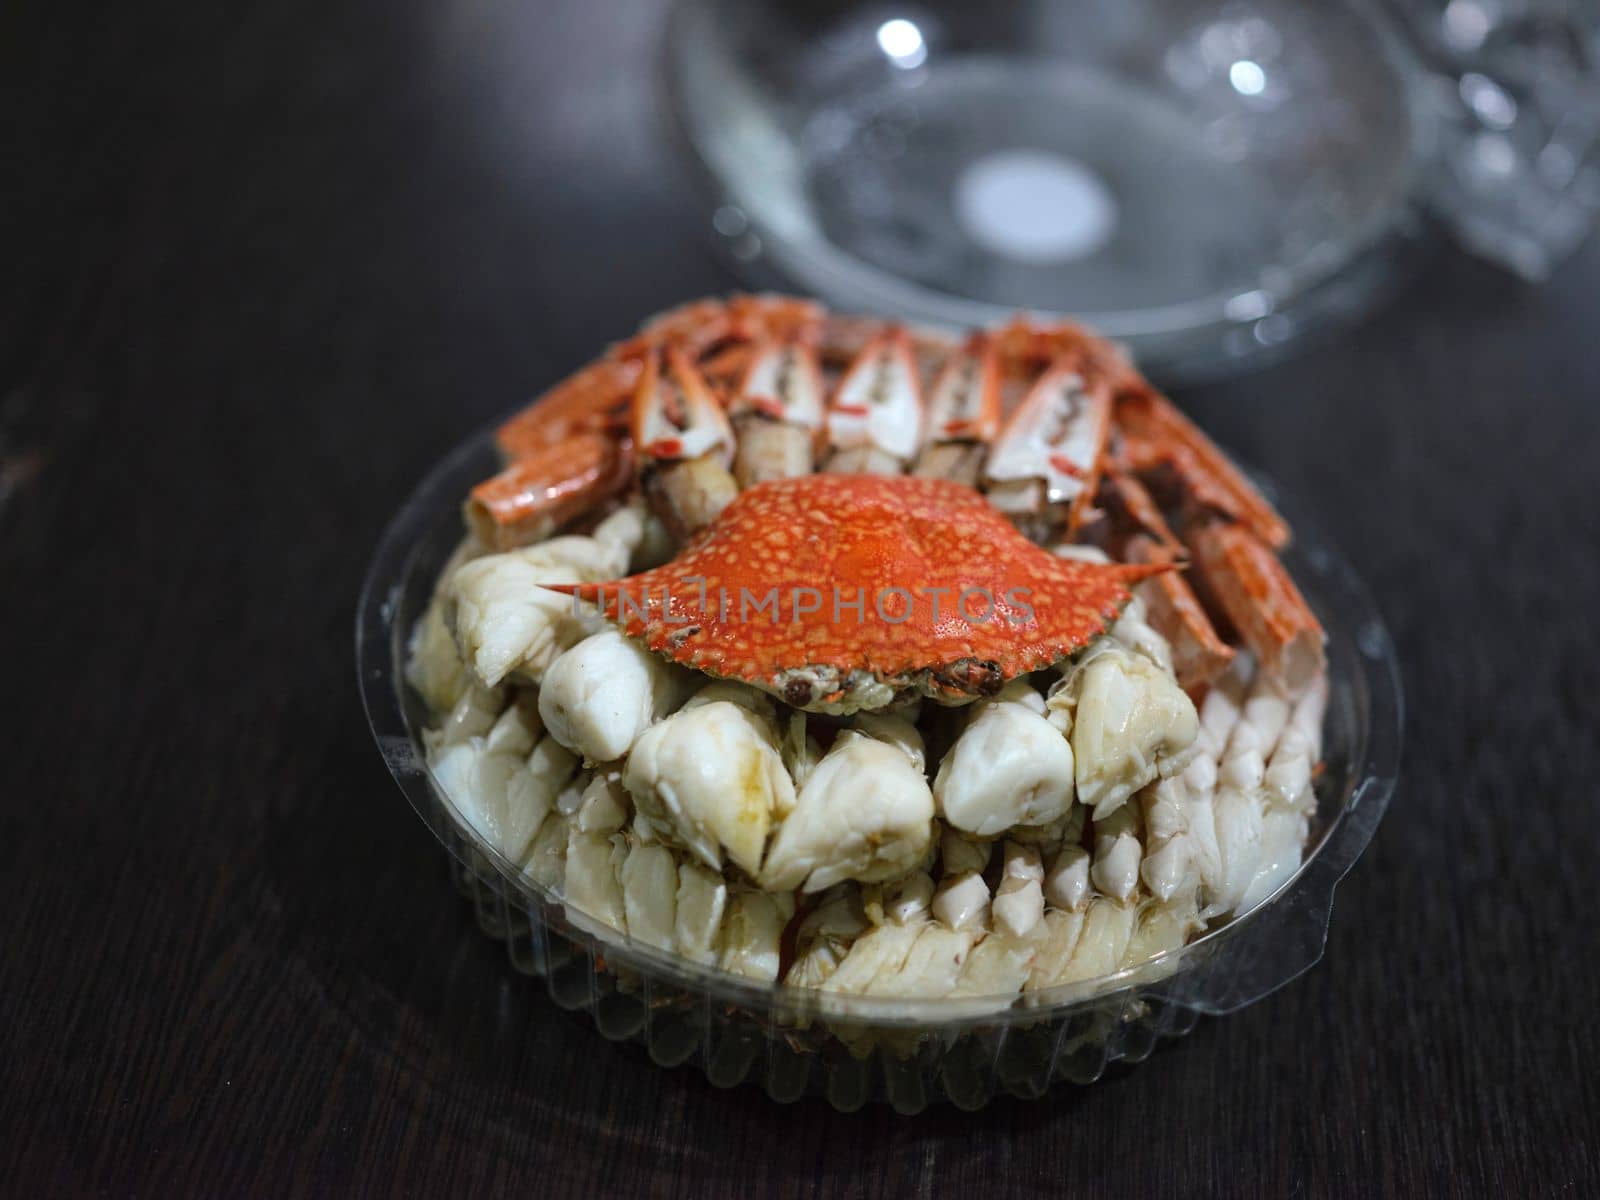 Steamed crab meat from blue crab by Hepjam